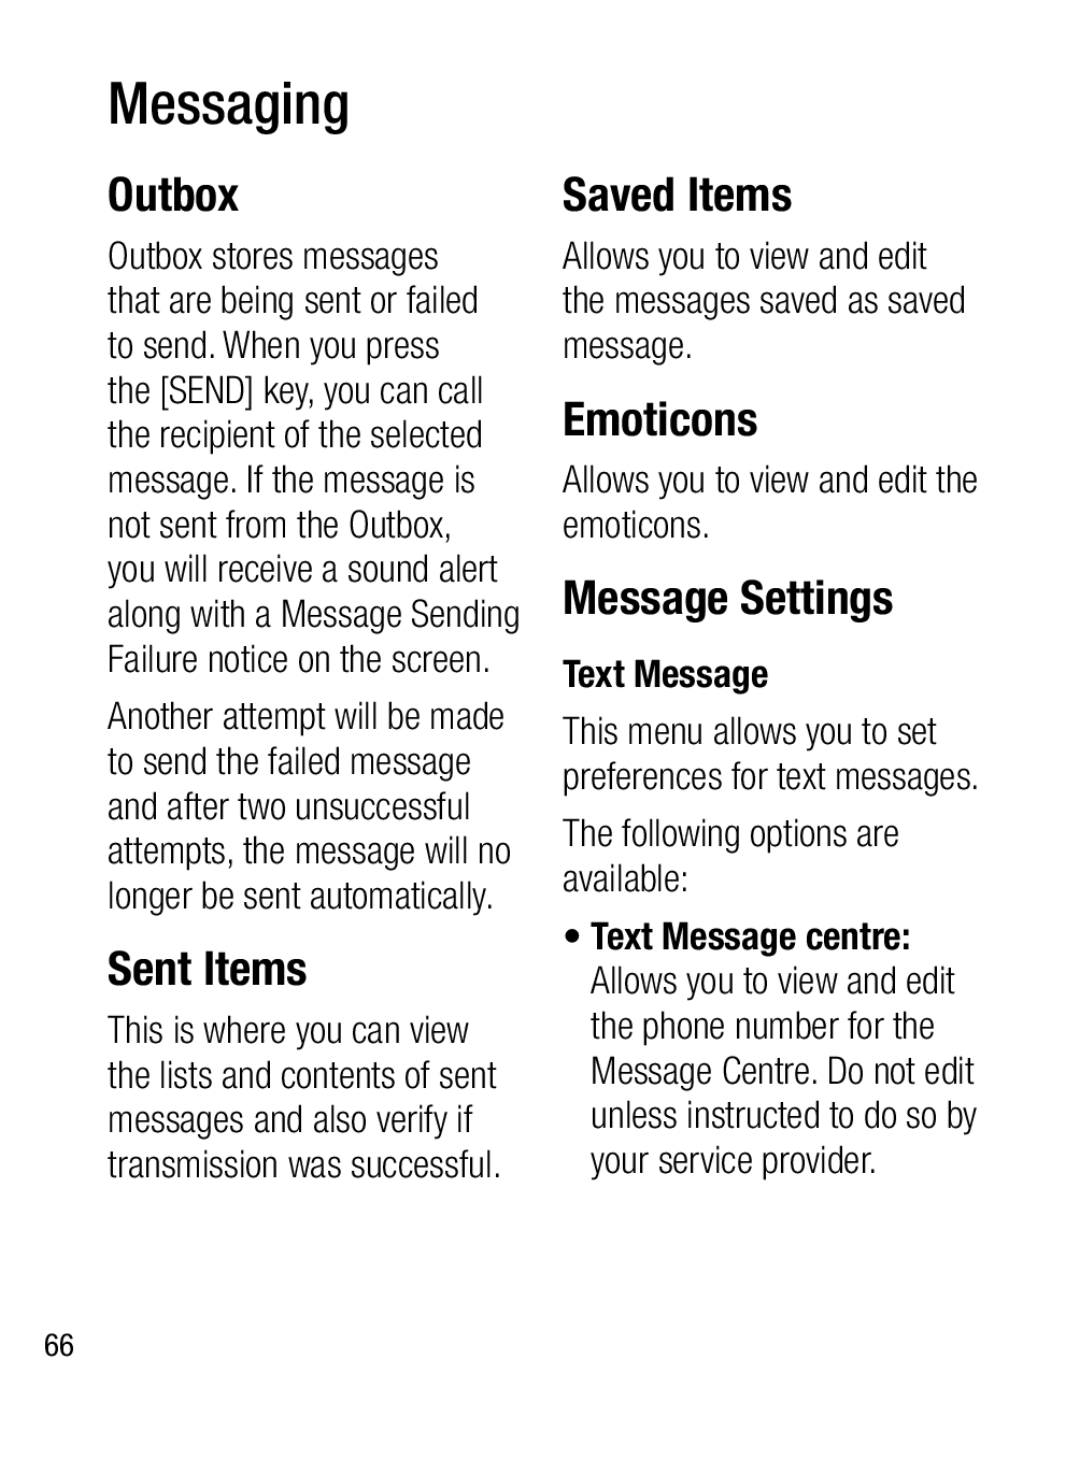 LG Electronics A133CH manual Outbox, Sent Items, Saved Items, Emoticons, Message Settings, Text Message, Messaging 